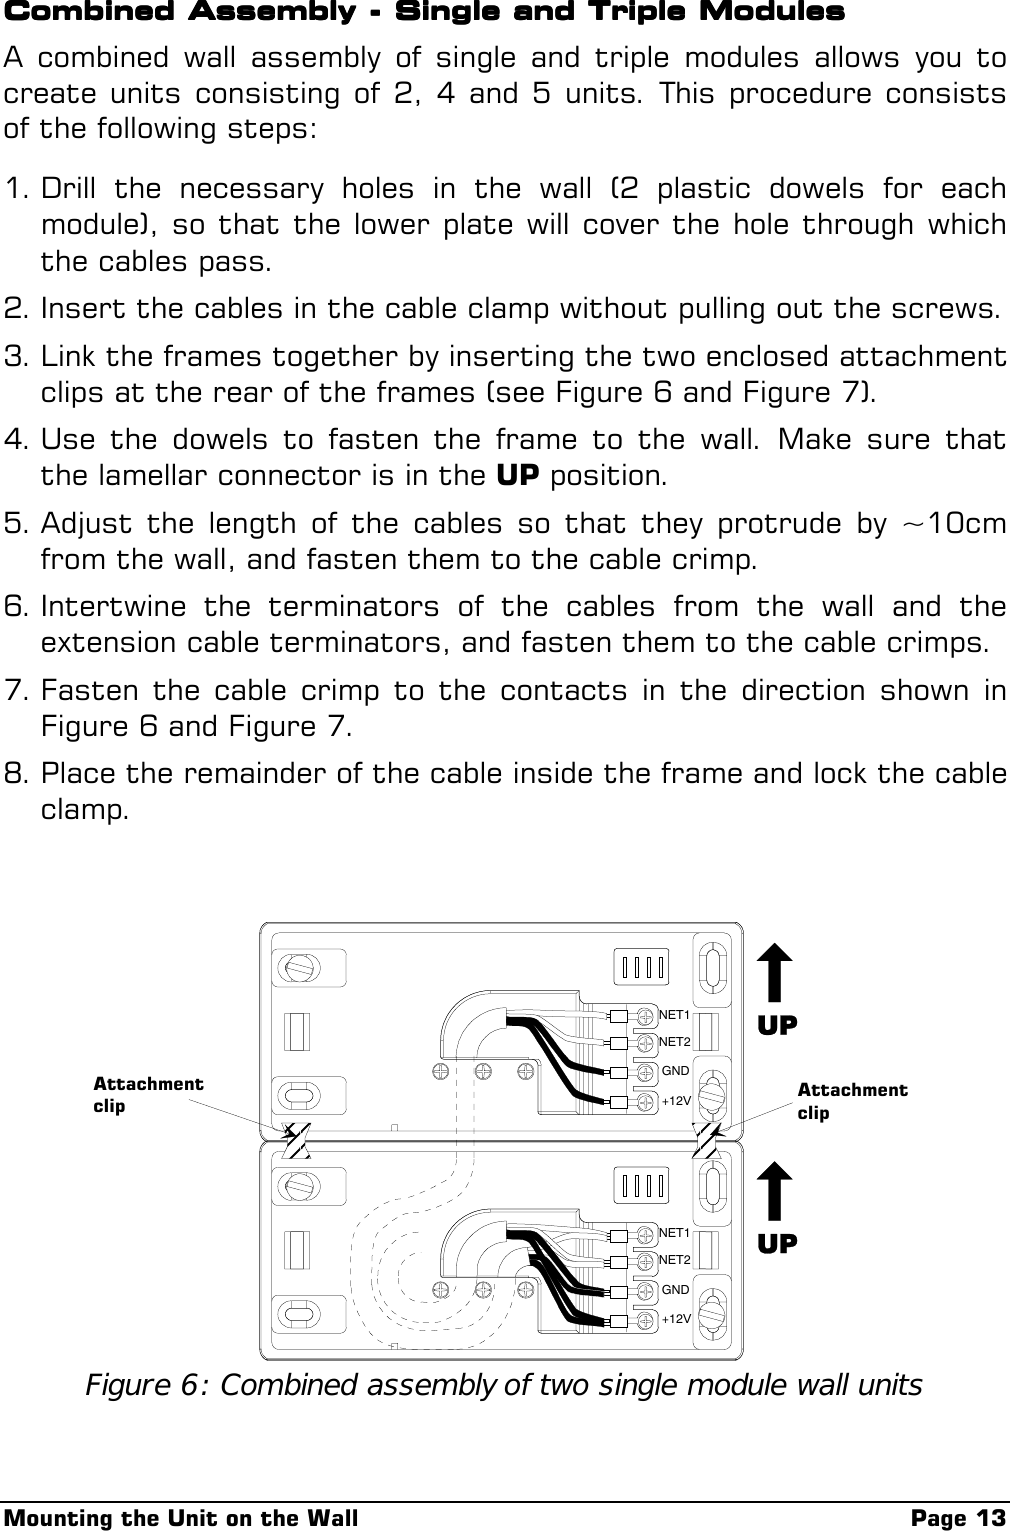 Mounting the Unit on the Wall Page 13Combined Assembly - Single and Triple ModulesCombined Assembly - Single and Triple ModulesCombined Assembly - Single and Triple ModulesCombined Assembly - Single and Triple ModulesA combined wall assembly of single and triple modules allows you tocreate units consisting of 2, 4 and 5 units. This procedure consistsof the following steps:1. Drill the necessary holes in the wall (2 plastic dowels for eachmodule), so that the lower plate will cover the hole through whichthe cables pass.2. Insert the cables in the cable clamp without pulling out the screws.3. Link the frames together by inserting the two enclosed attachmentclips at the rear of the frames (see Figure 6 and Figure 7).4. Use the dowels to fasten the frame to the wall. Make sure thatthe lamellar connector is in the UP position.5. Adjust the length of the cables so that they protrude by ~10cmfrom the wall, and fasten them to the cable crimp.6. Intertwine the terminators of the cables from the wall and theextension cable terminators, and fasten them to the cable crimps.7. Fasten the cable crimp to the contacts in the direction shown inFigure 6 and Figure 7.8. Place the remainder of the cable inside the frame and lock the cableclamp.NET1NET2GND+12VNET1NET2GND+12VAttachmentclip AttachmentclipFigure 6: Combined assembly of two single module wall units